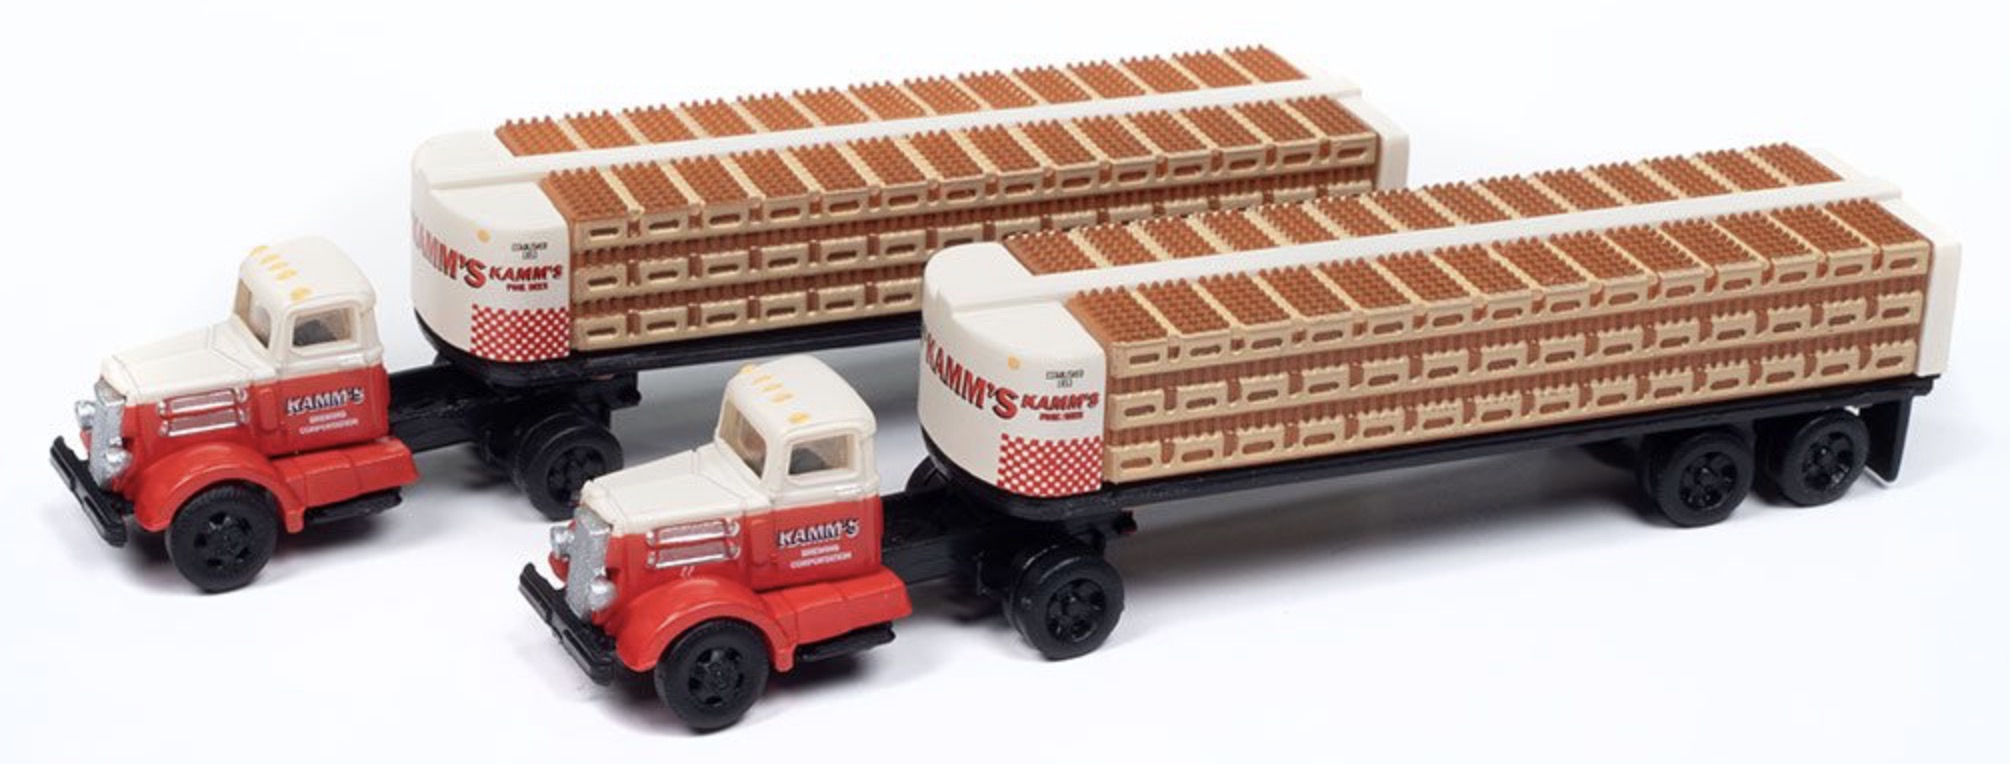 N Scale - Classic Metal Works - 51208 - Truck, IH R190 - Kamm and Schellinger - 1954 IH R-190 Tractor with Flatbed